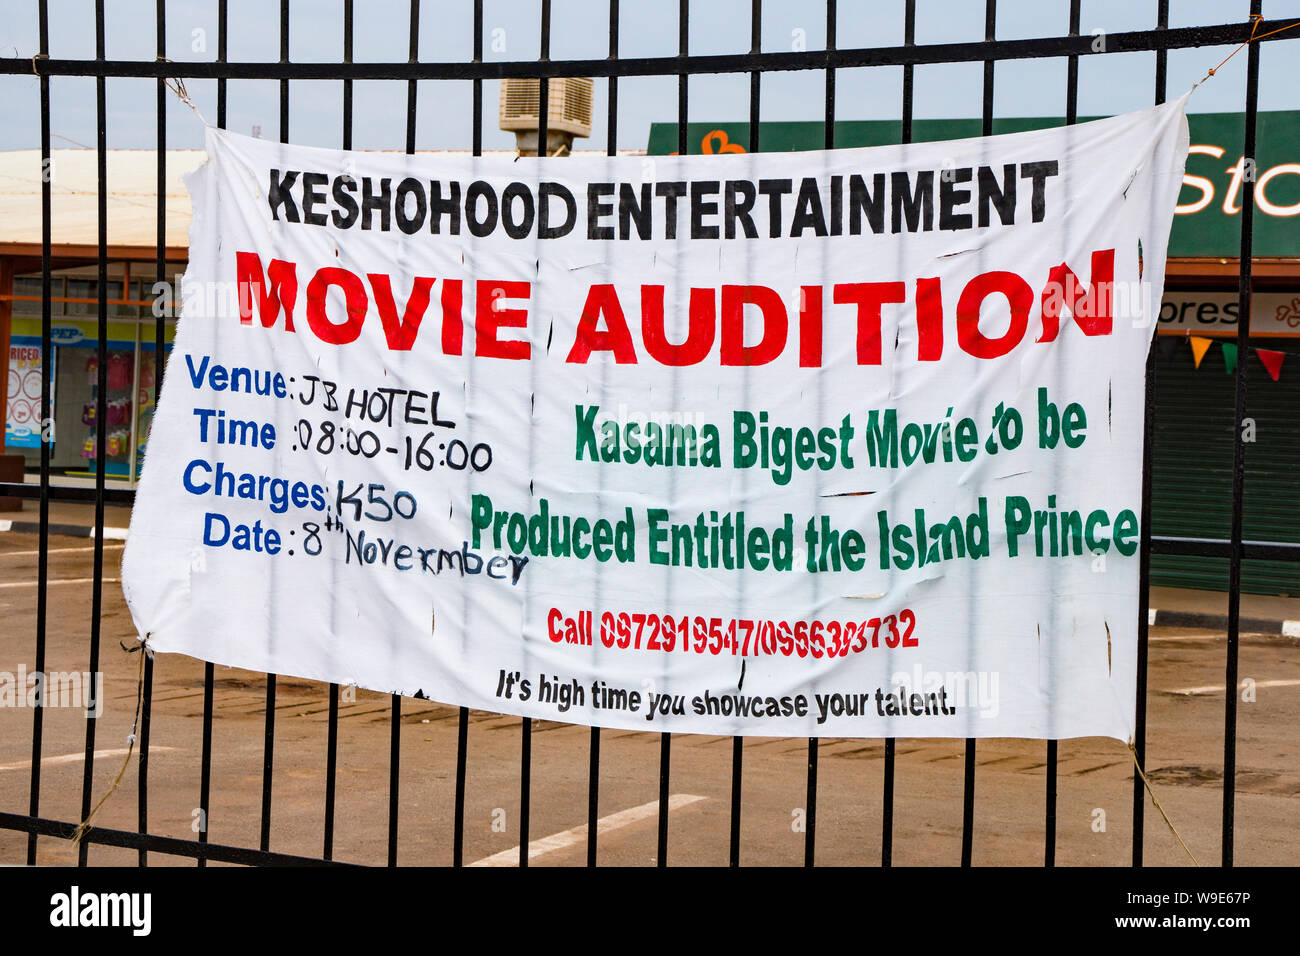 Poster for movie audition on railings in Kasama, Zambia Stock Photo